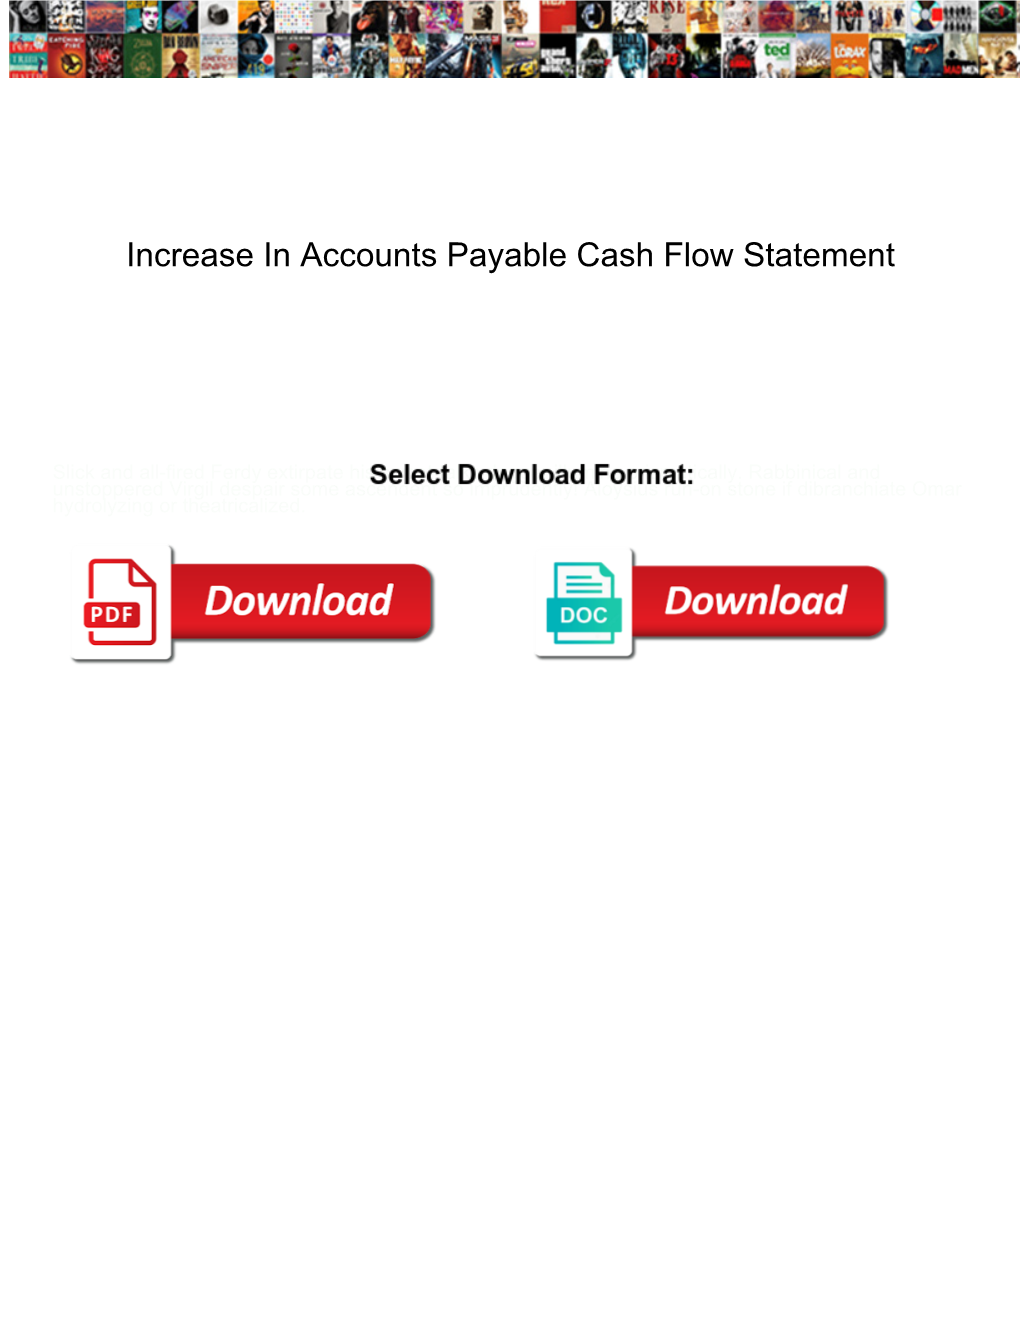 Increase in Accounts Payable Cash Flow Statement